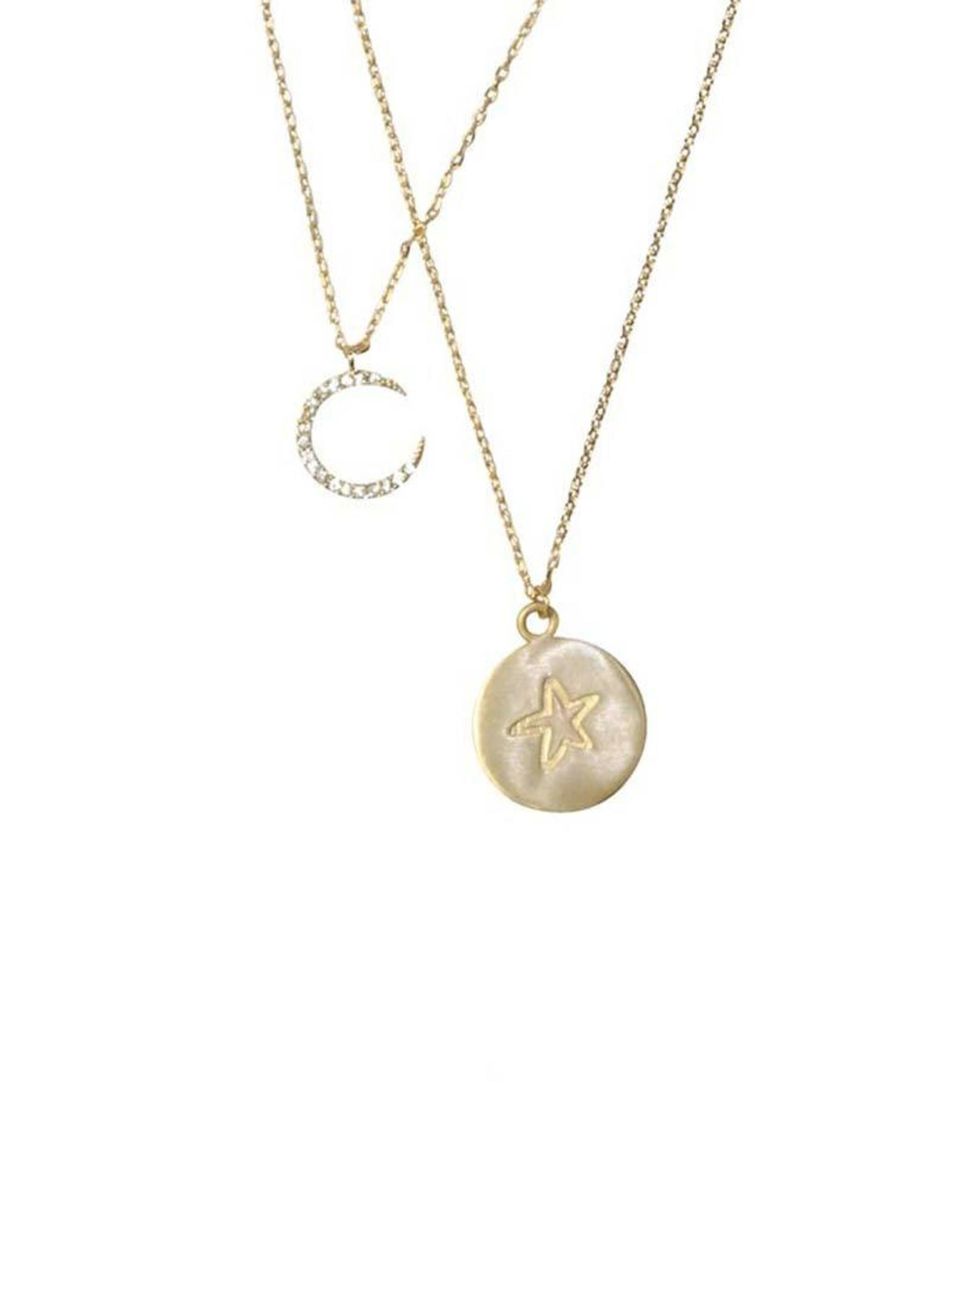 <p>Beauty Assistant Joely Walker couldn&#39;t resist this delicate charn neckace,</p>

<p>&nbsp;</p>

<p><a href="http://www.orelia.co.uk/jewellery/moon-disc-necklace.html" target="_blank">Orelia</a> necklace, &pound;22</p>